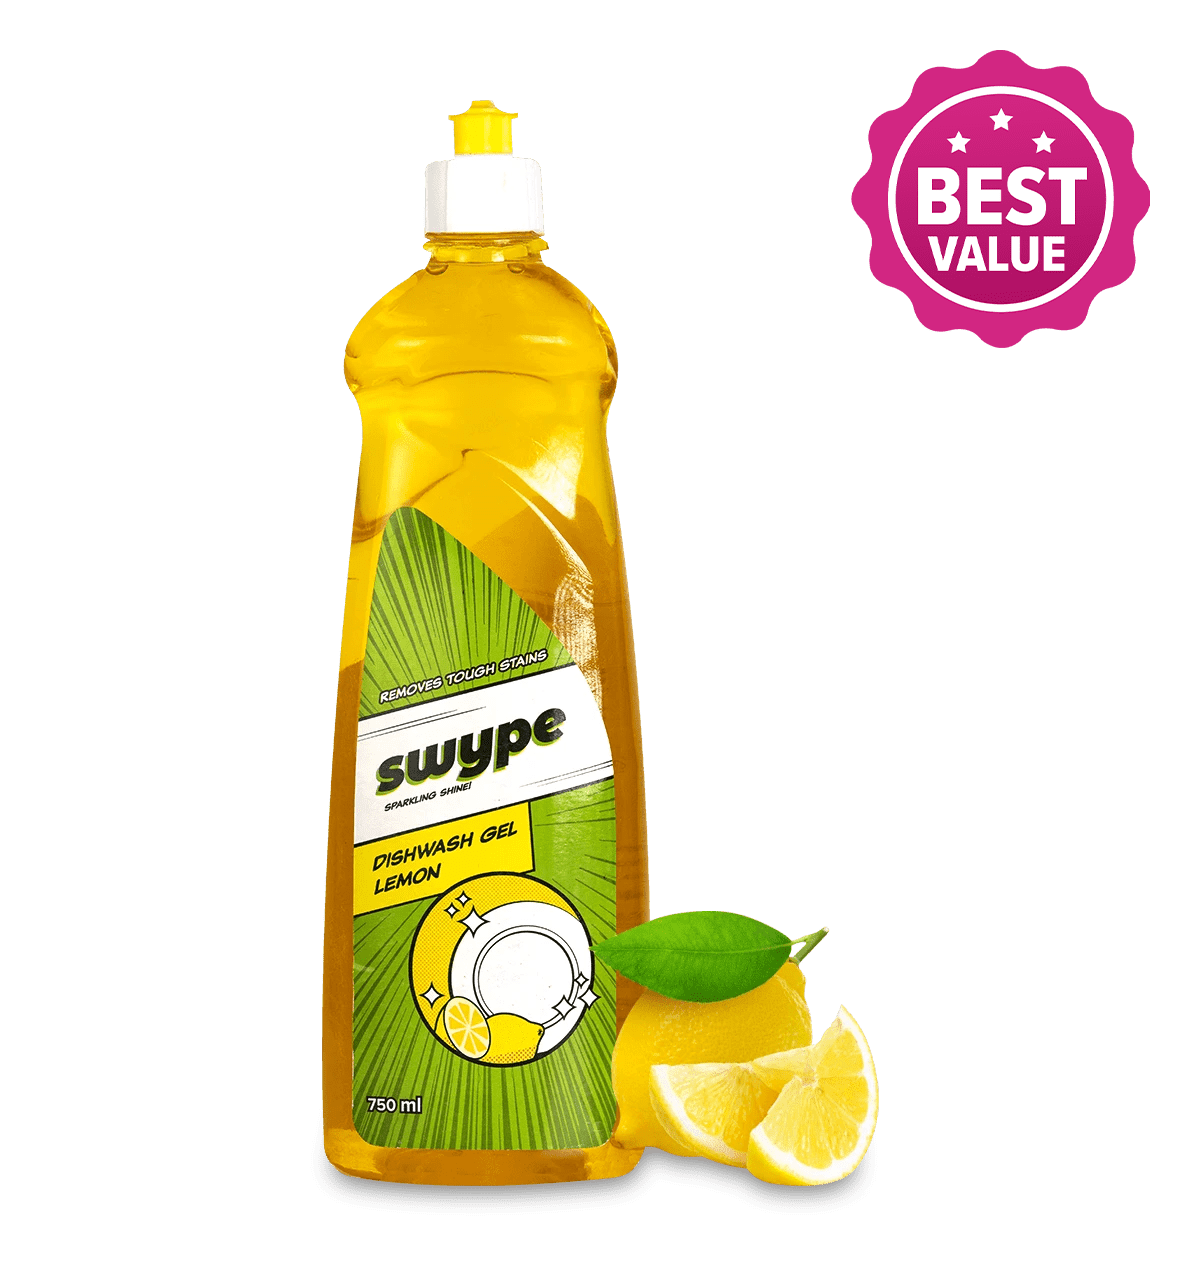 CleanPrince Chainsaw Cleaner, 2 Litres, Chainsaw Cleaner, Blank Resin Oil,  Grease Remover, Resin Remover, Chainsaw Cleaner, Cleaning Agent, Garden